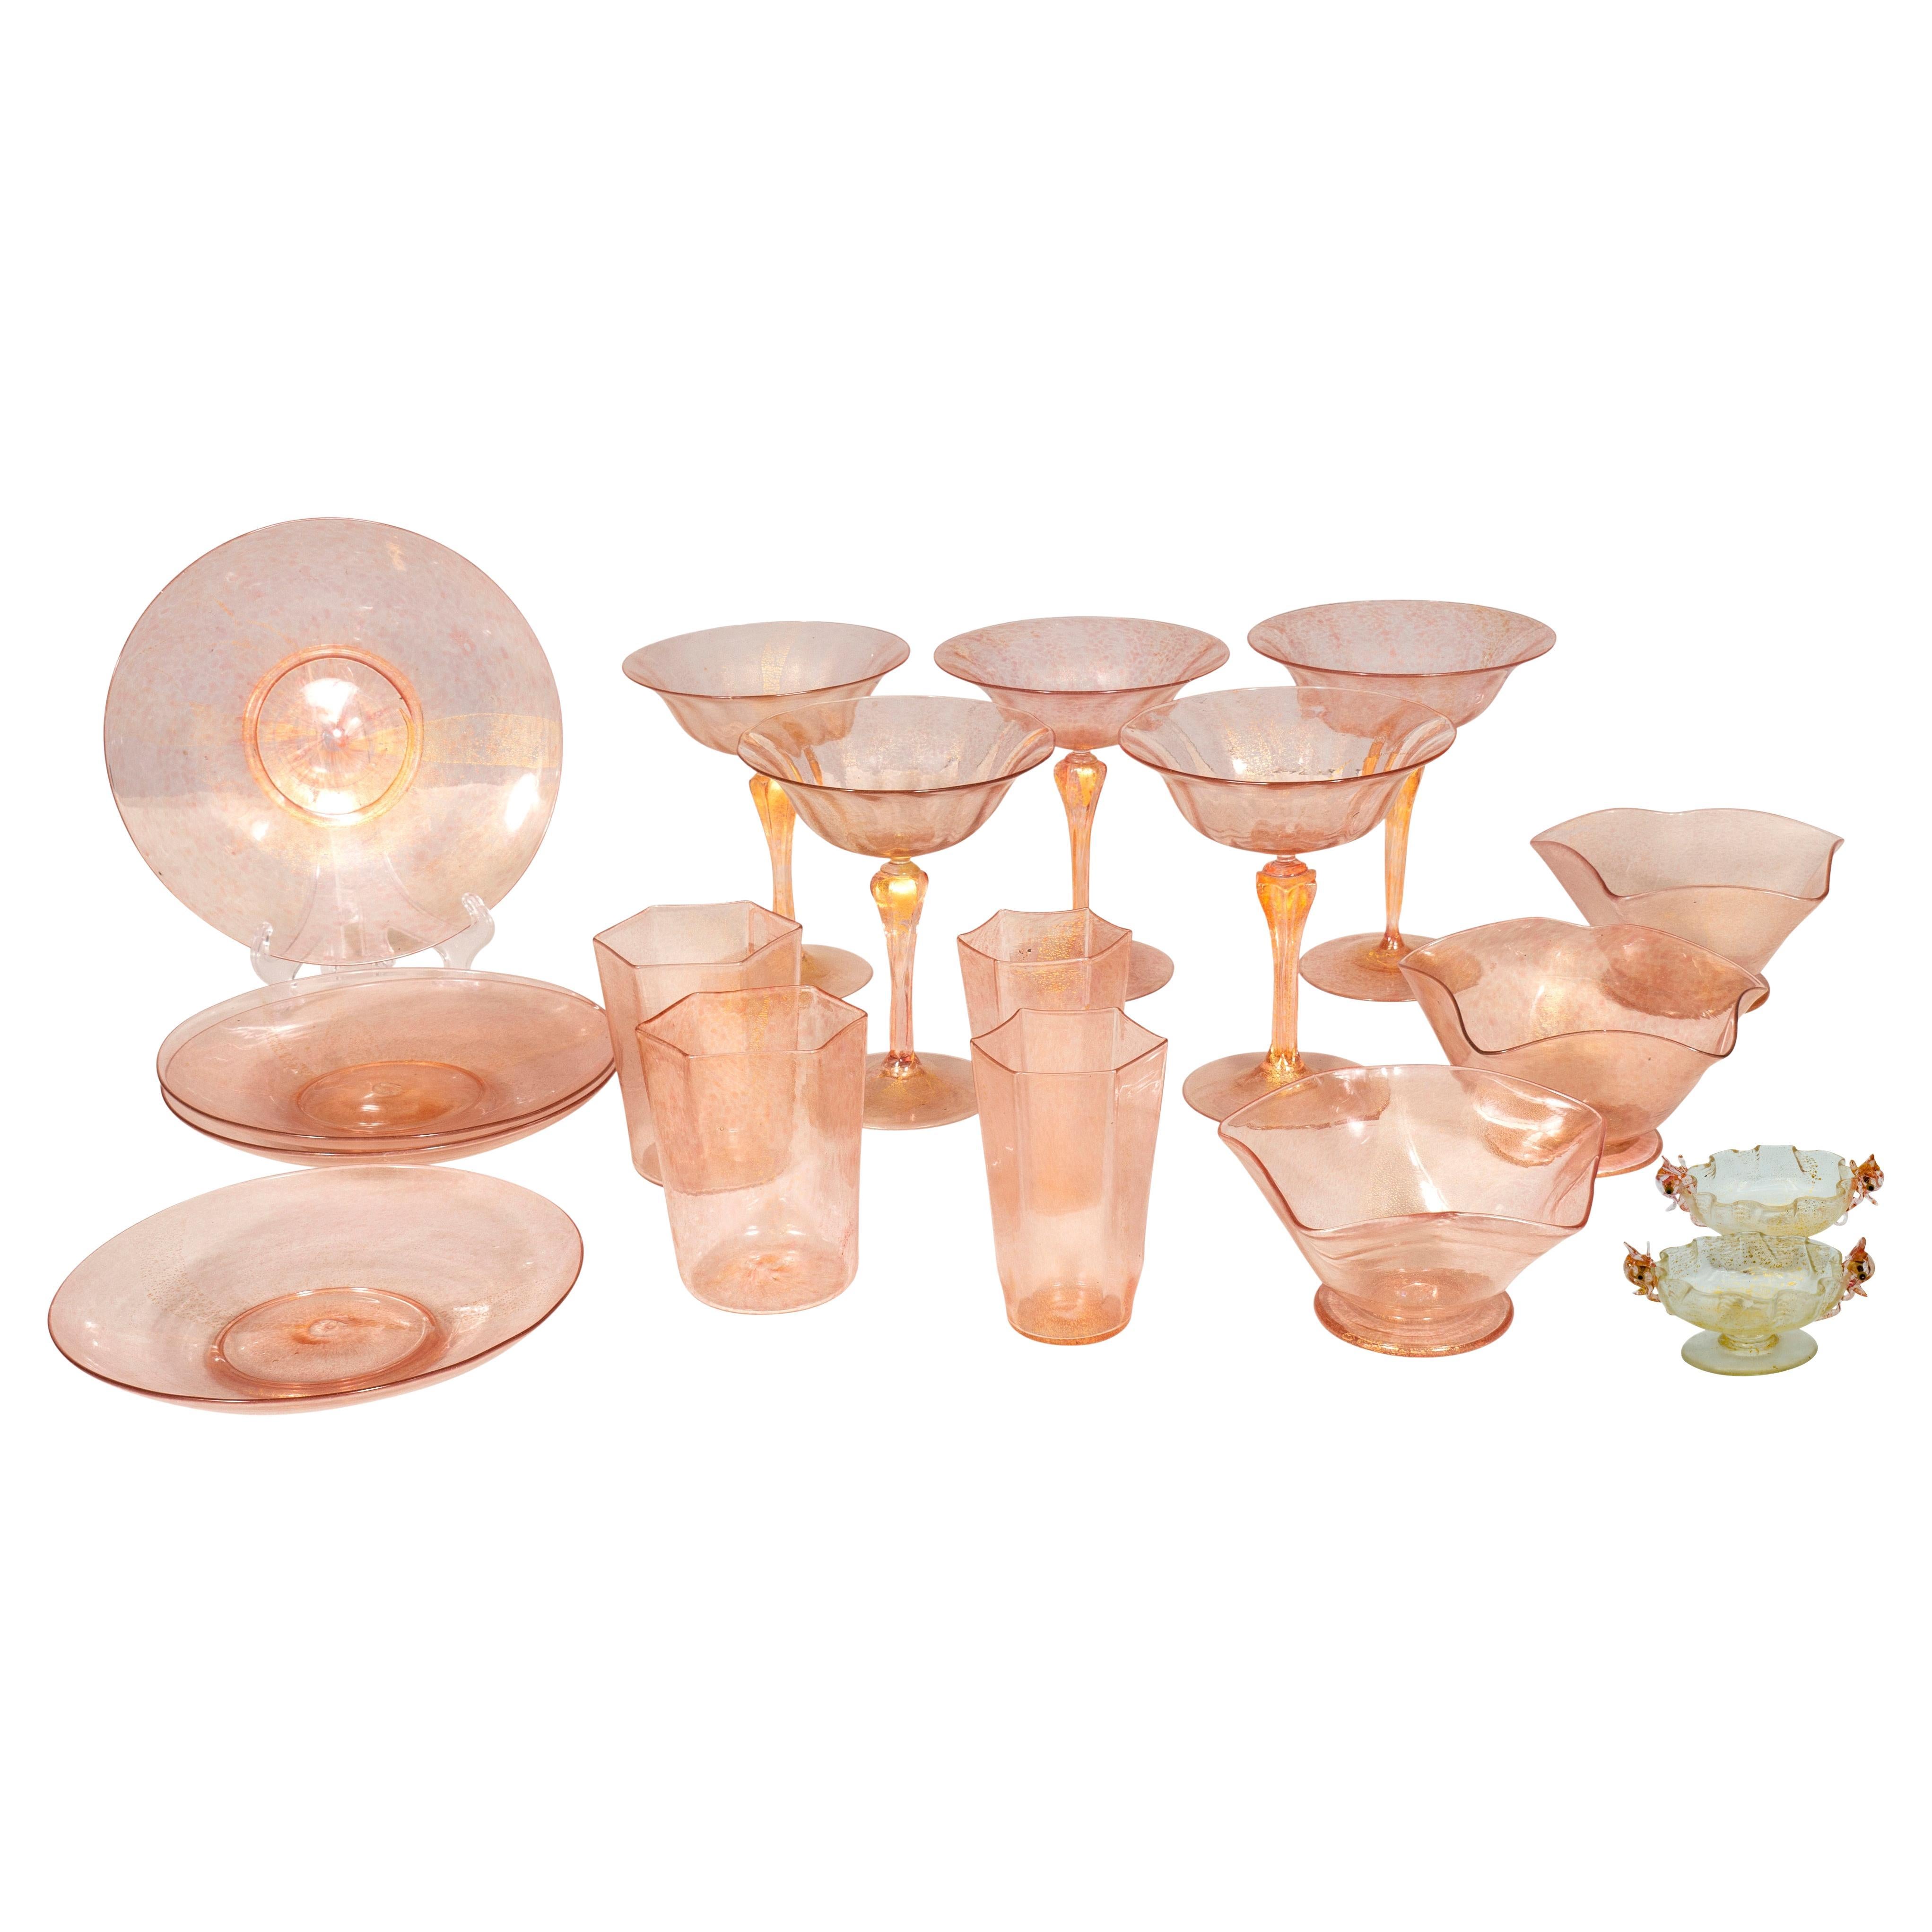 In pink and gold. Comprising 27 small octagonal tumblers, 25 larger tumblers, 10 dessert bowls and under plates, 16 champagne, 14 table salts in a different color. 
Purchased in the 1980s in Boston from an antique shop for 6,000.